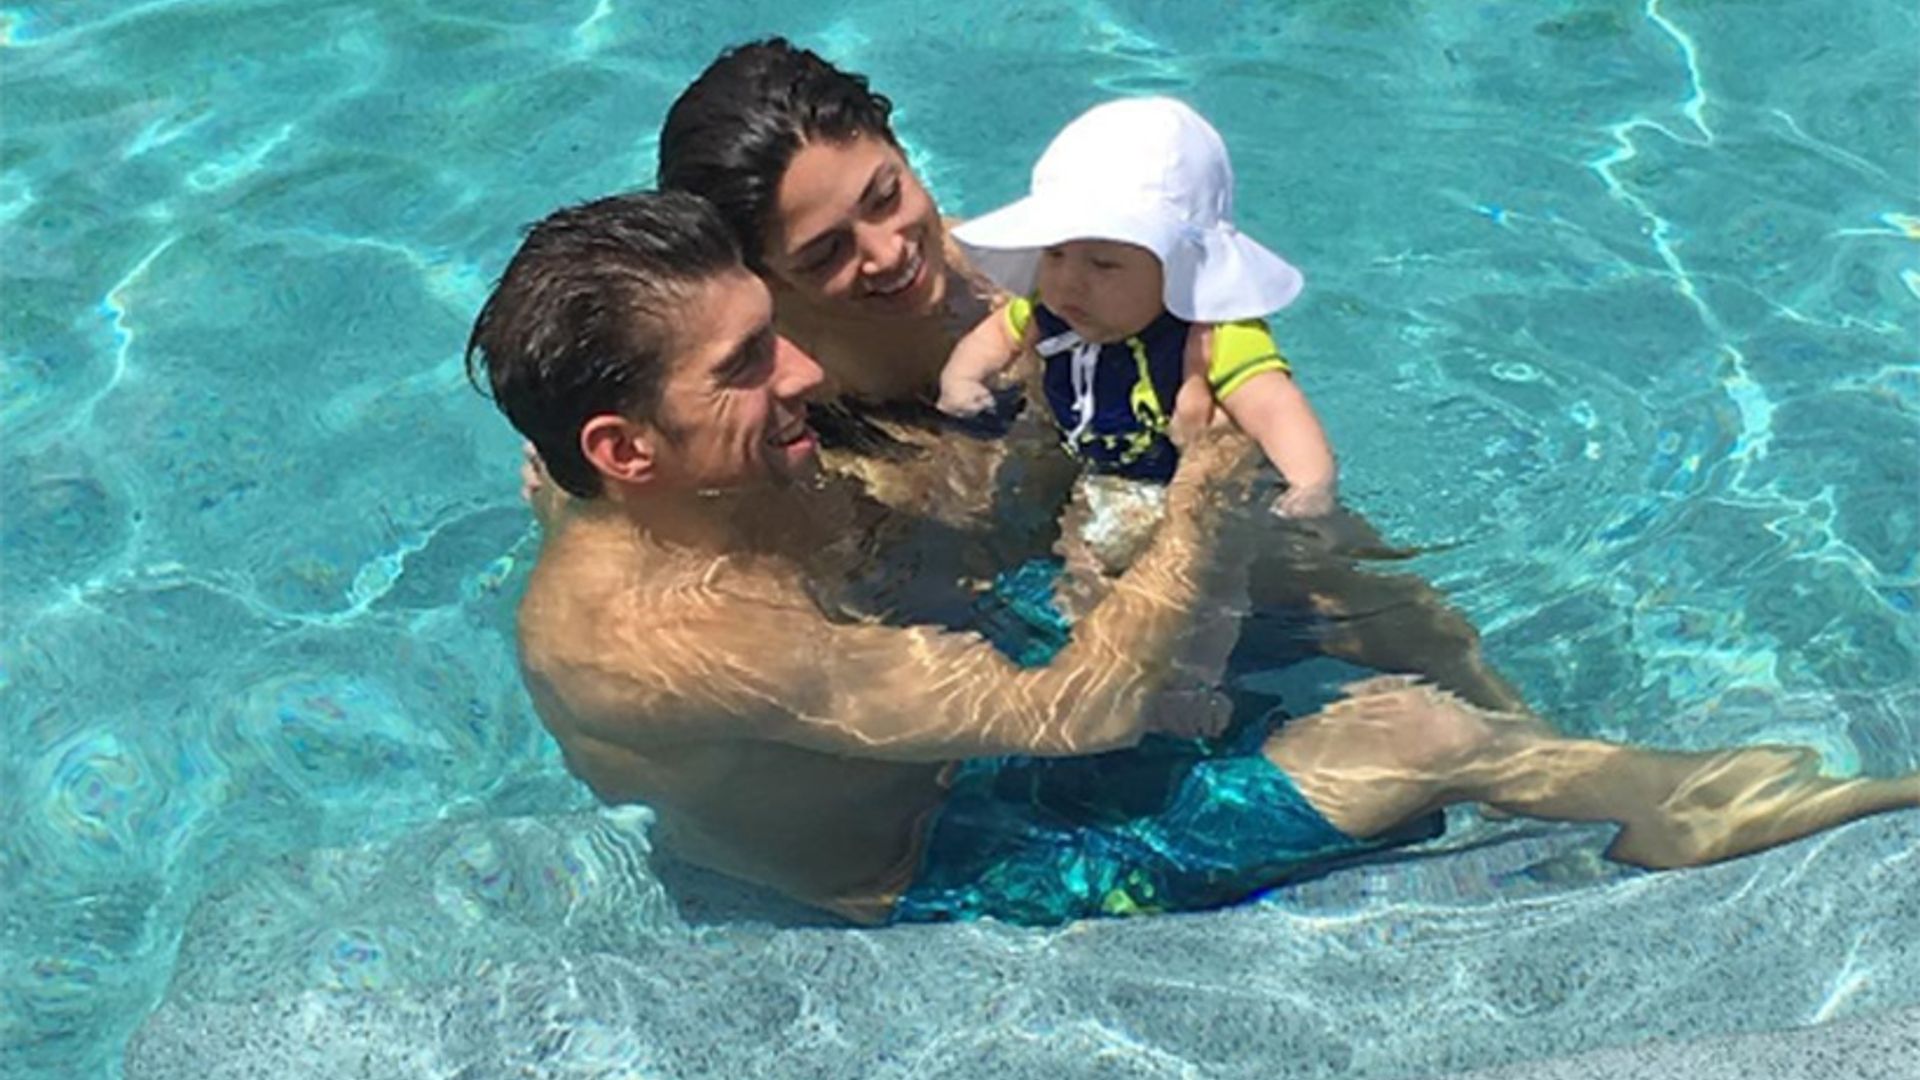 We love how Michael Phelps spent his first day of retirement